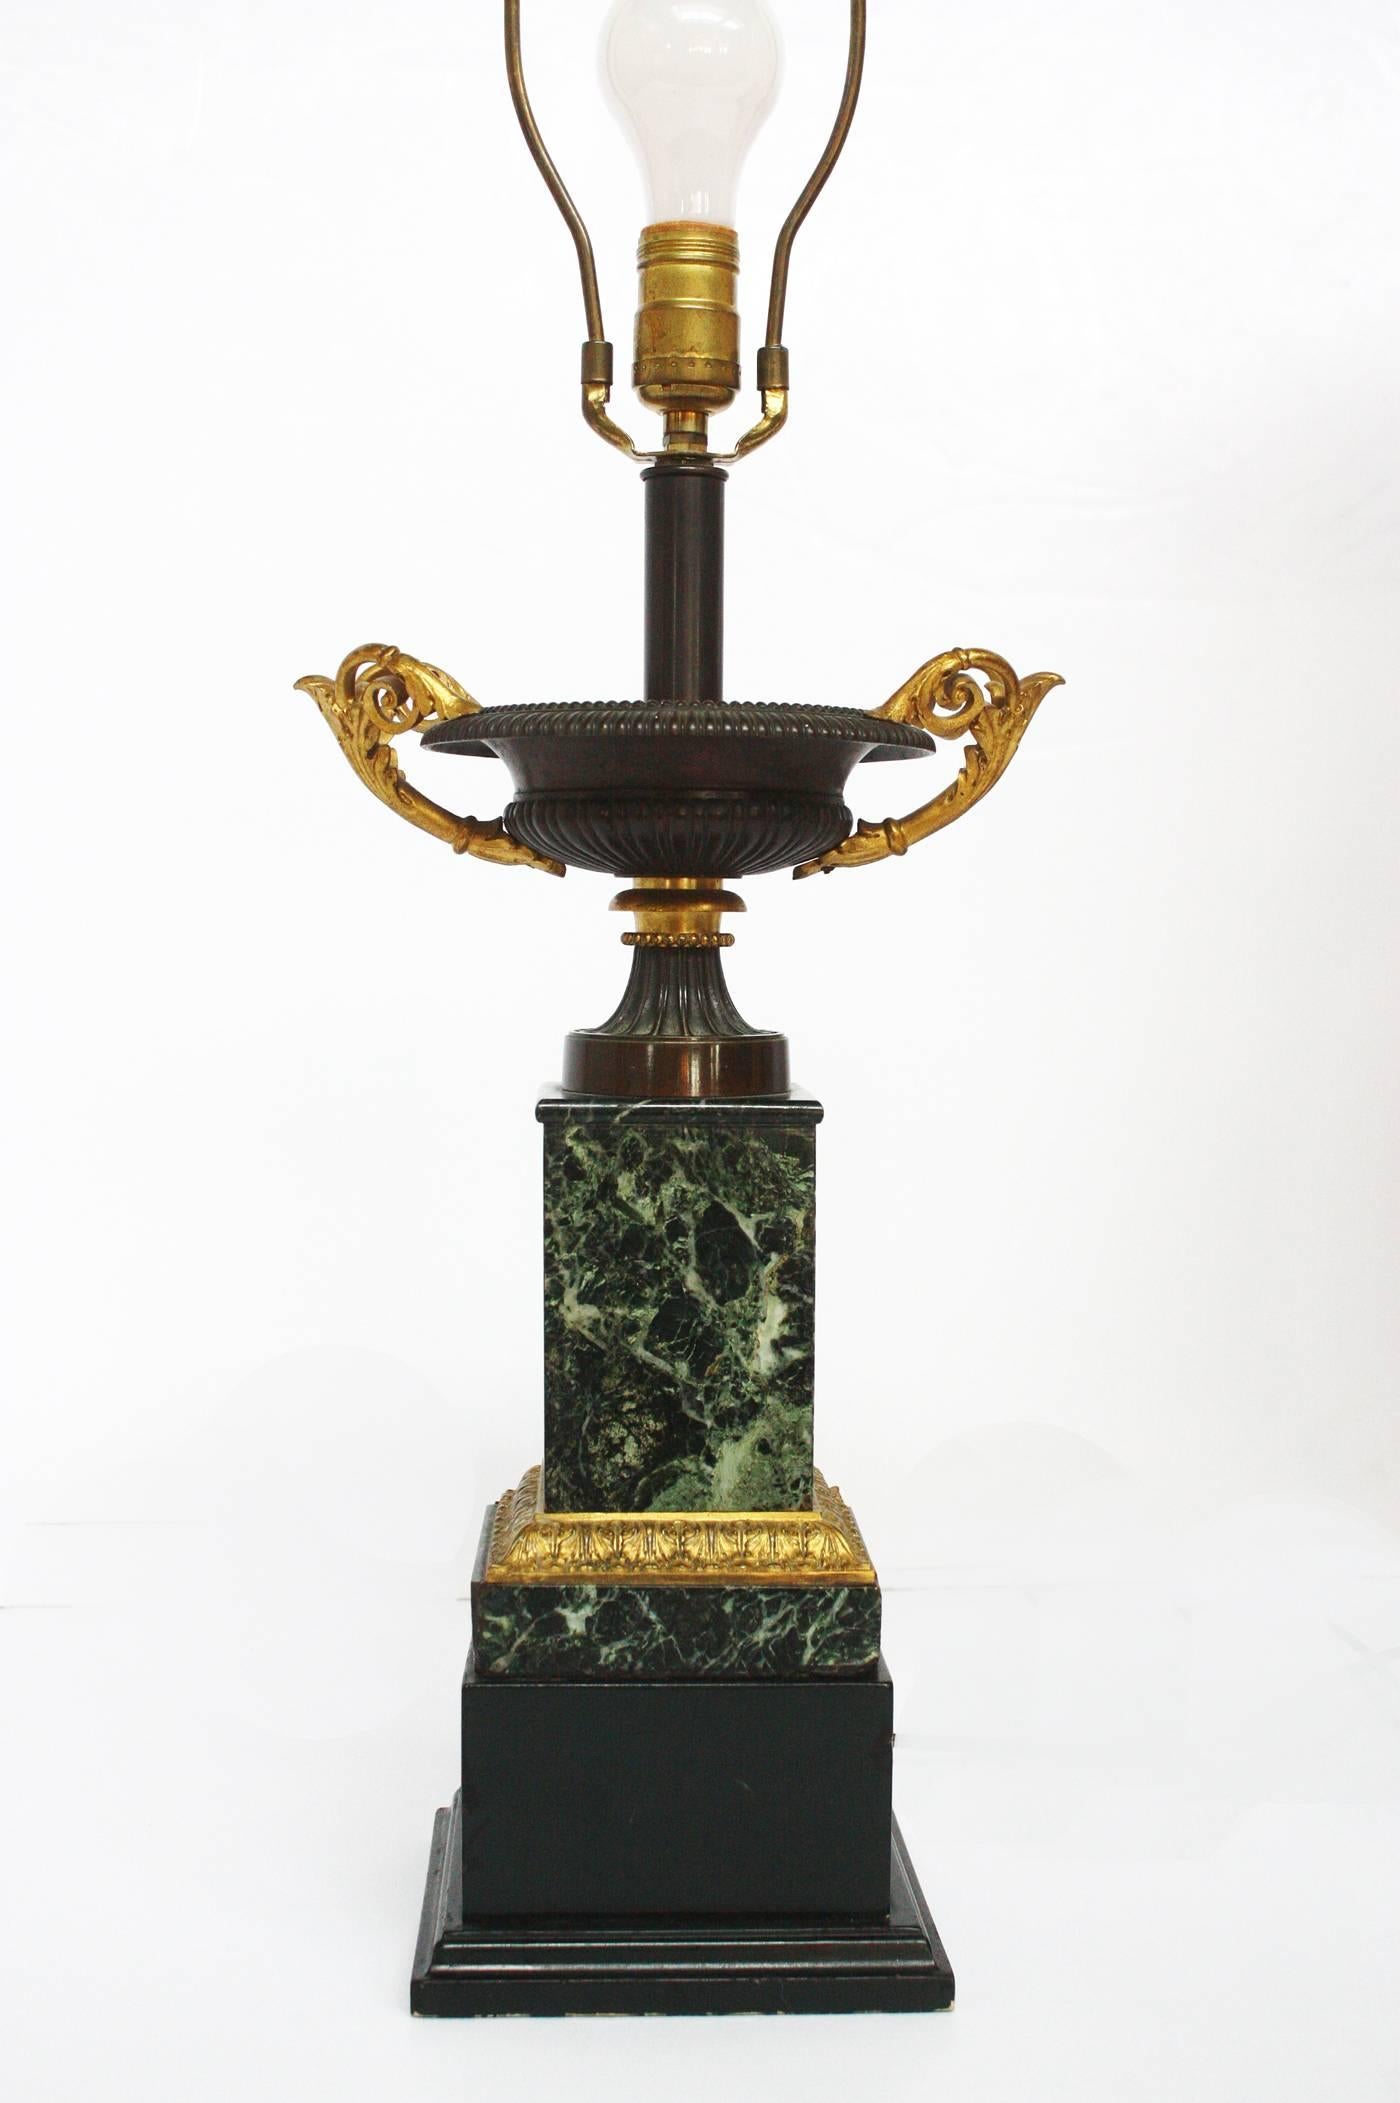 A pair of grand tour bronze tazas with gilt bronze handles on marble and wood bases accented with gilt bronze decoration mounted as lamps. Mid-19th century, France.